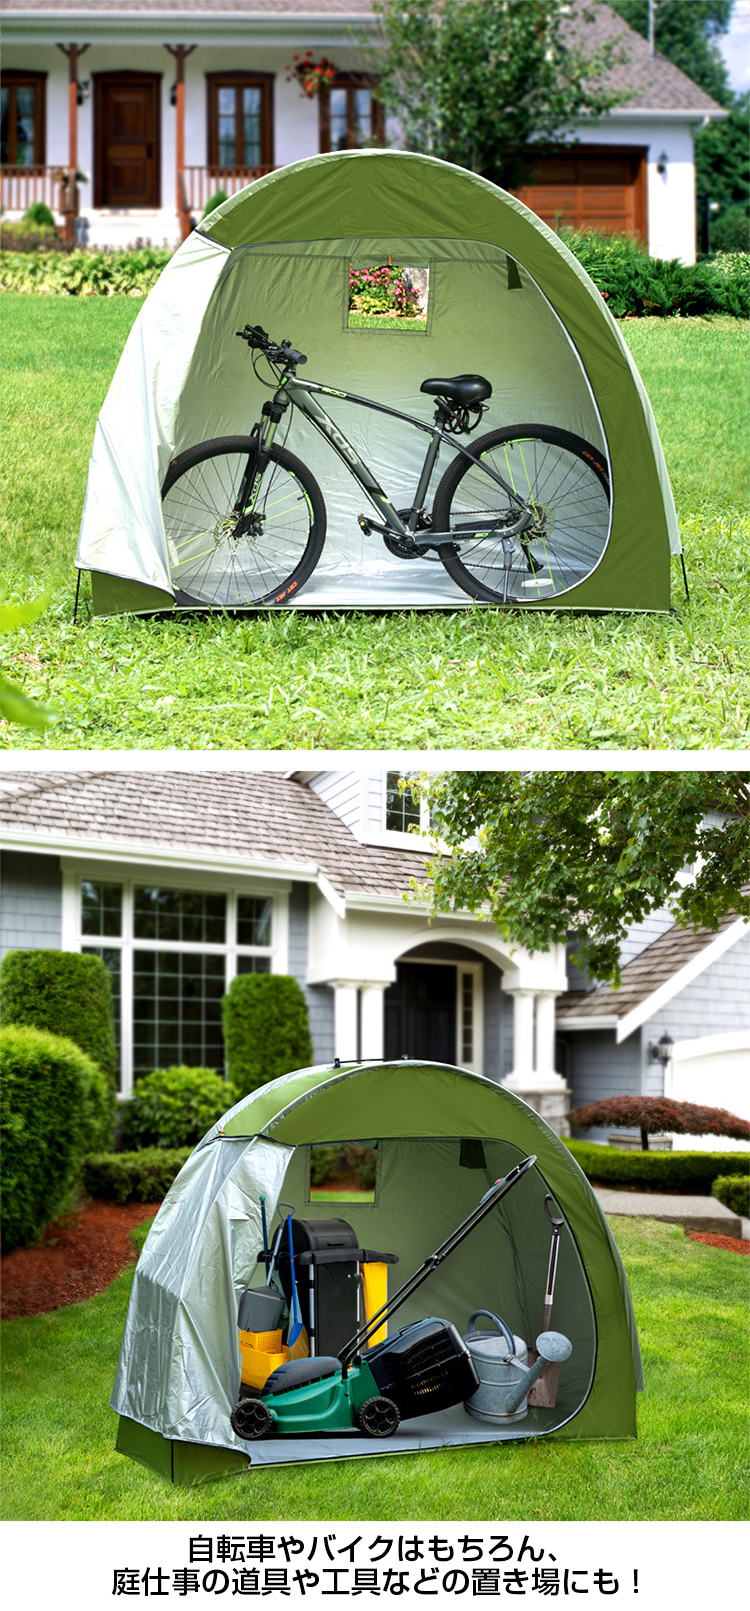 [6 months guarantee ] bicycle tent 1 pcs cycle house roof bicycle place cycle garage home use waterproof thing put storage storage canopy sunshade snow .. storage bag attaching 